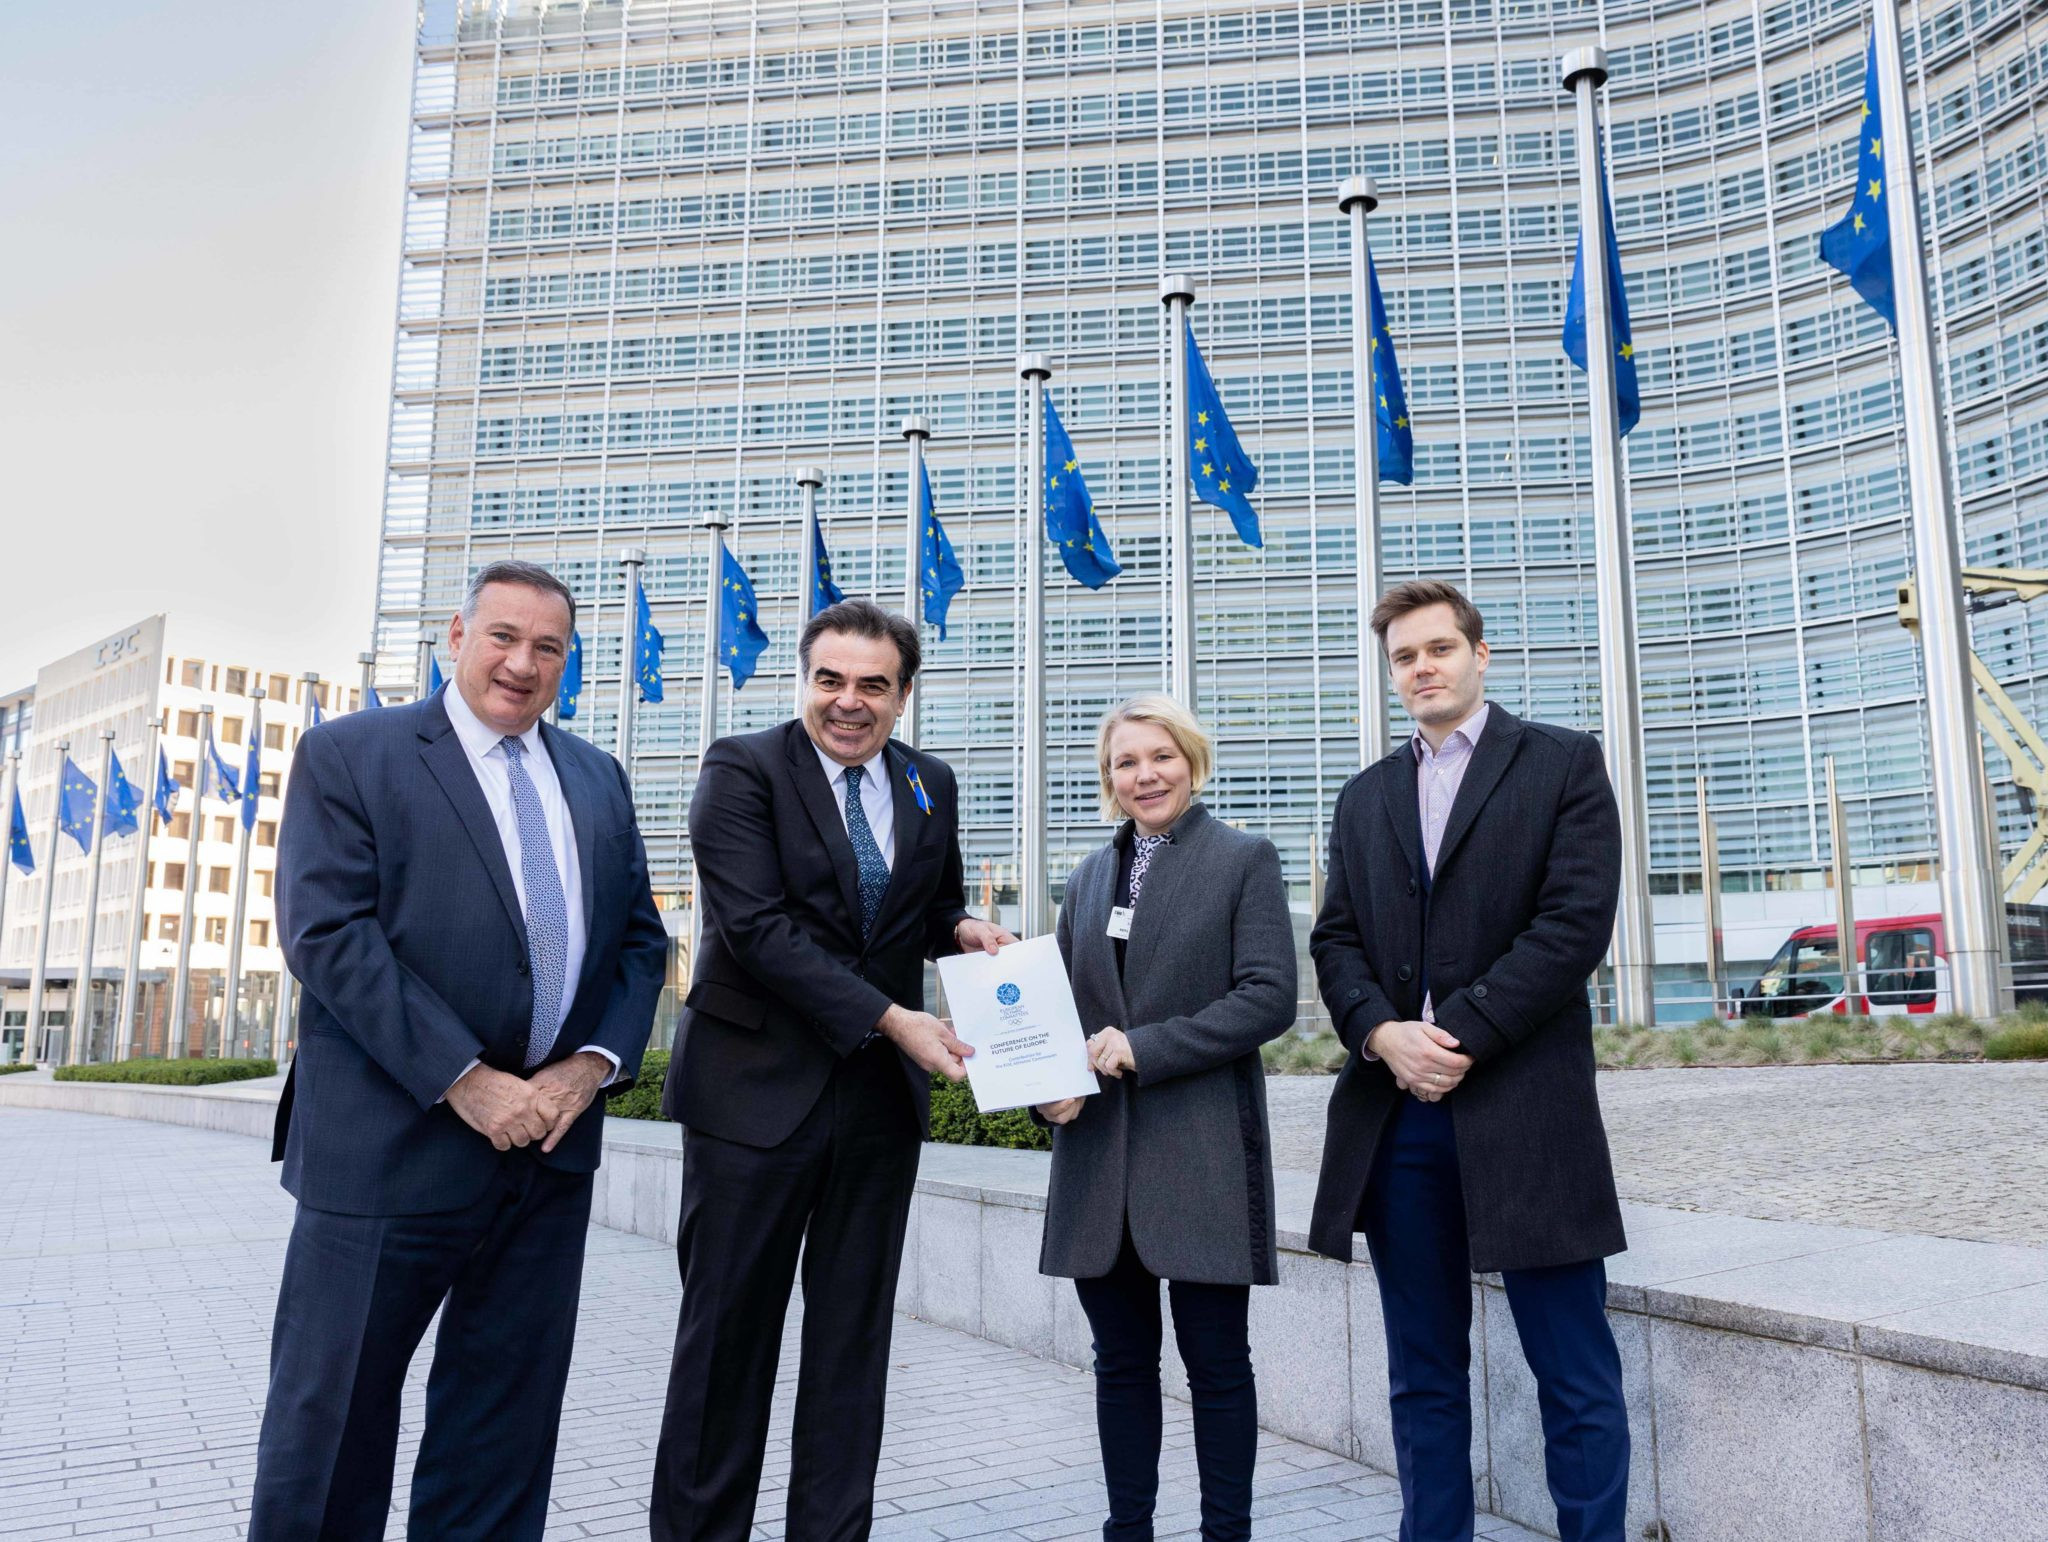 EOC President Spyros Capralos, left, was able to brief European Commission vice-president Margaritis Schinas, second left, over progress on providing humanitarian aid to the Ukrainian Olympic community when they met with athlete representatives from the IOC and EOC in Brussels ©Getty Images